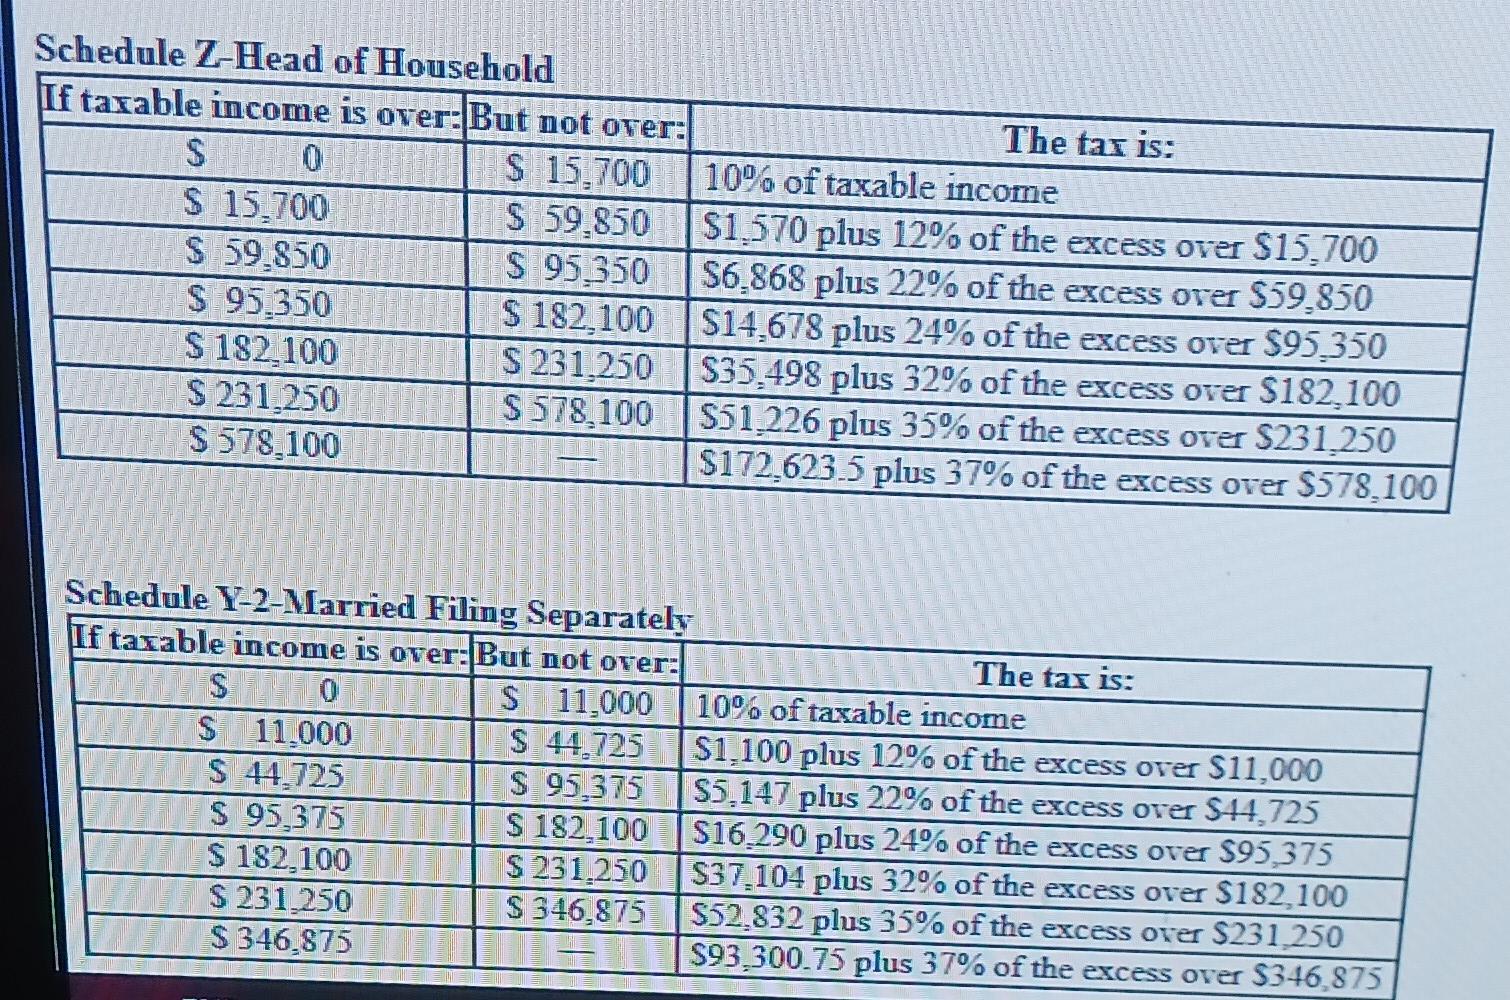 Schedule Z-Head of Household If taxable income is over: But not over: $ 15.700 $ 59,850 $ 95.350 $ 182,100 $